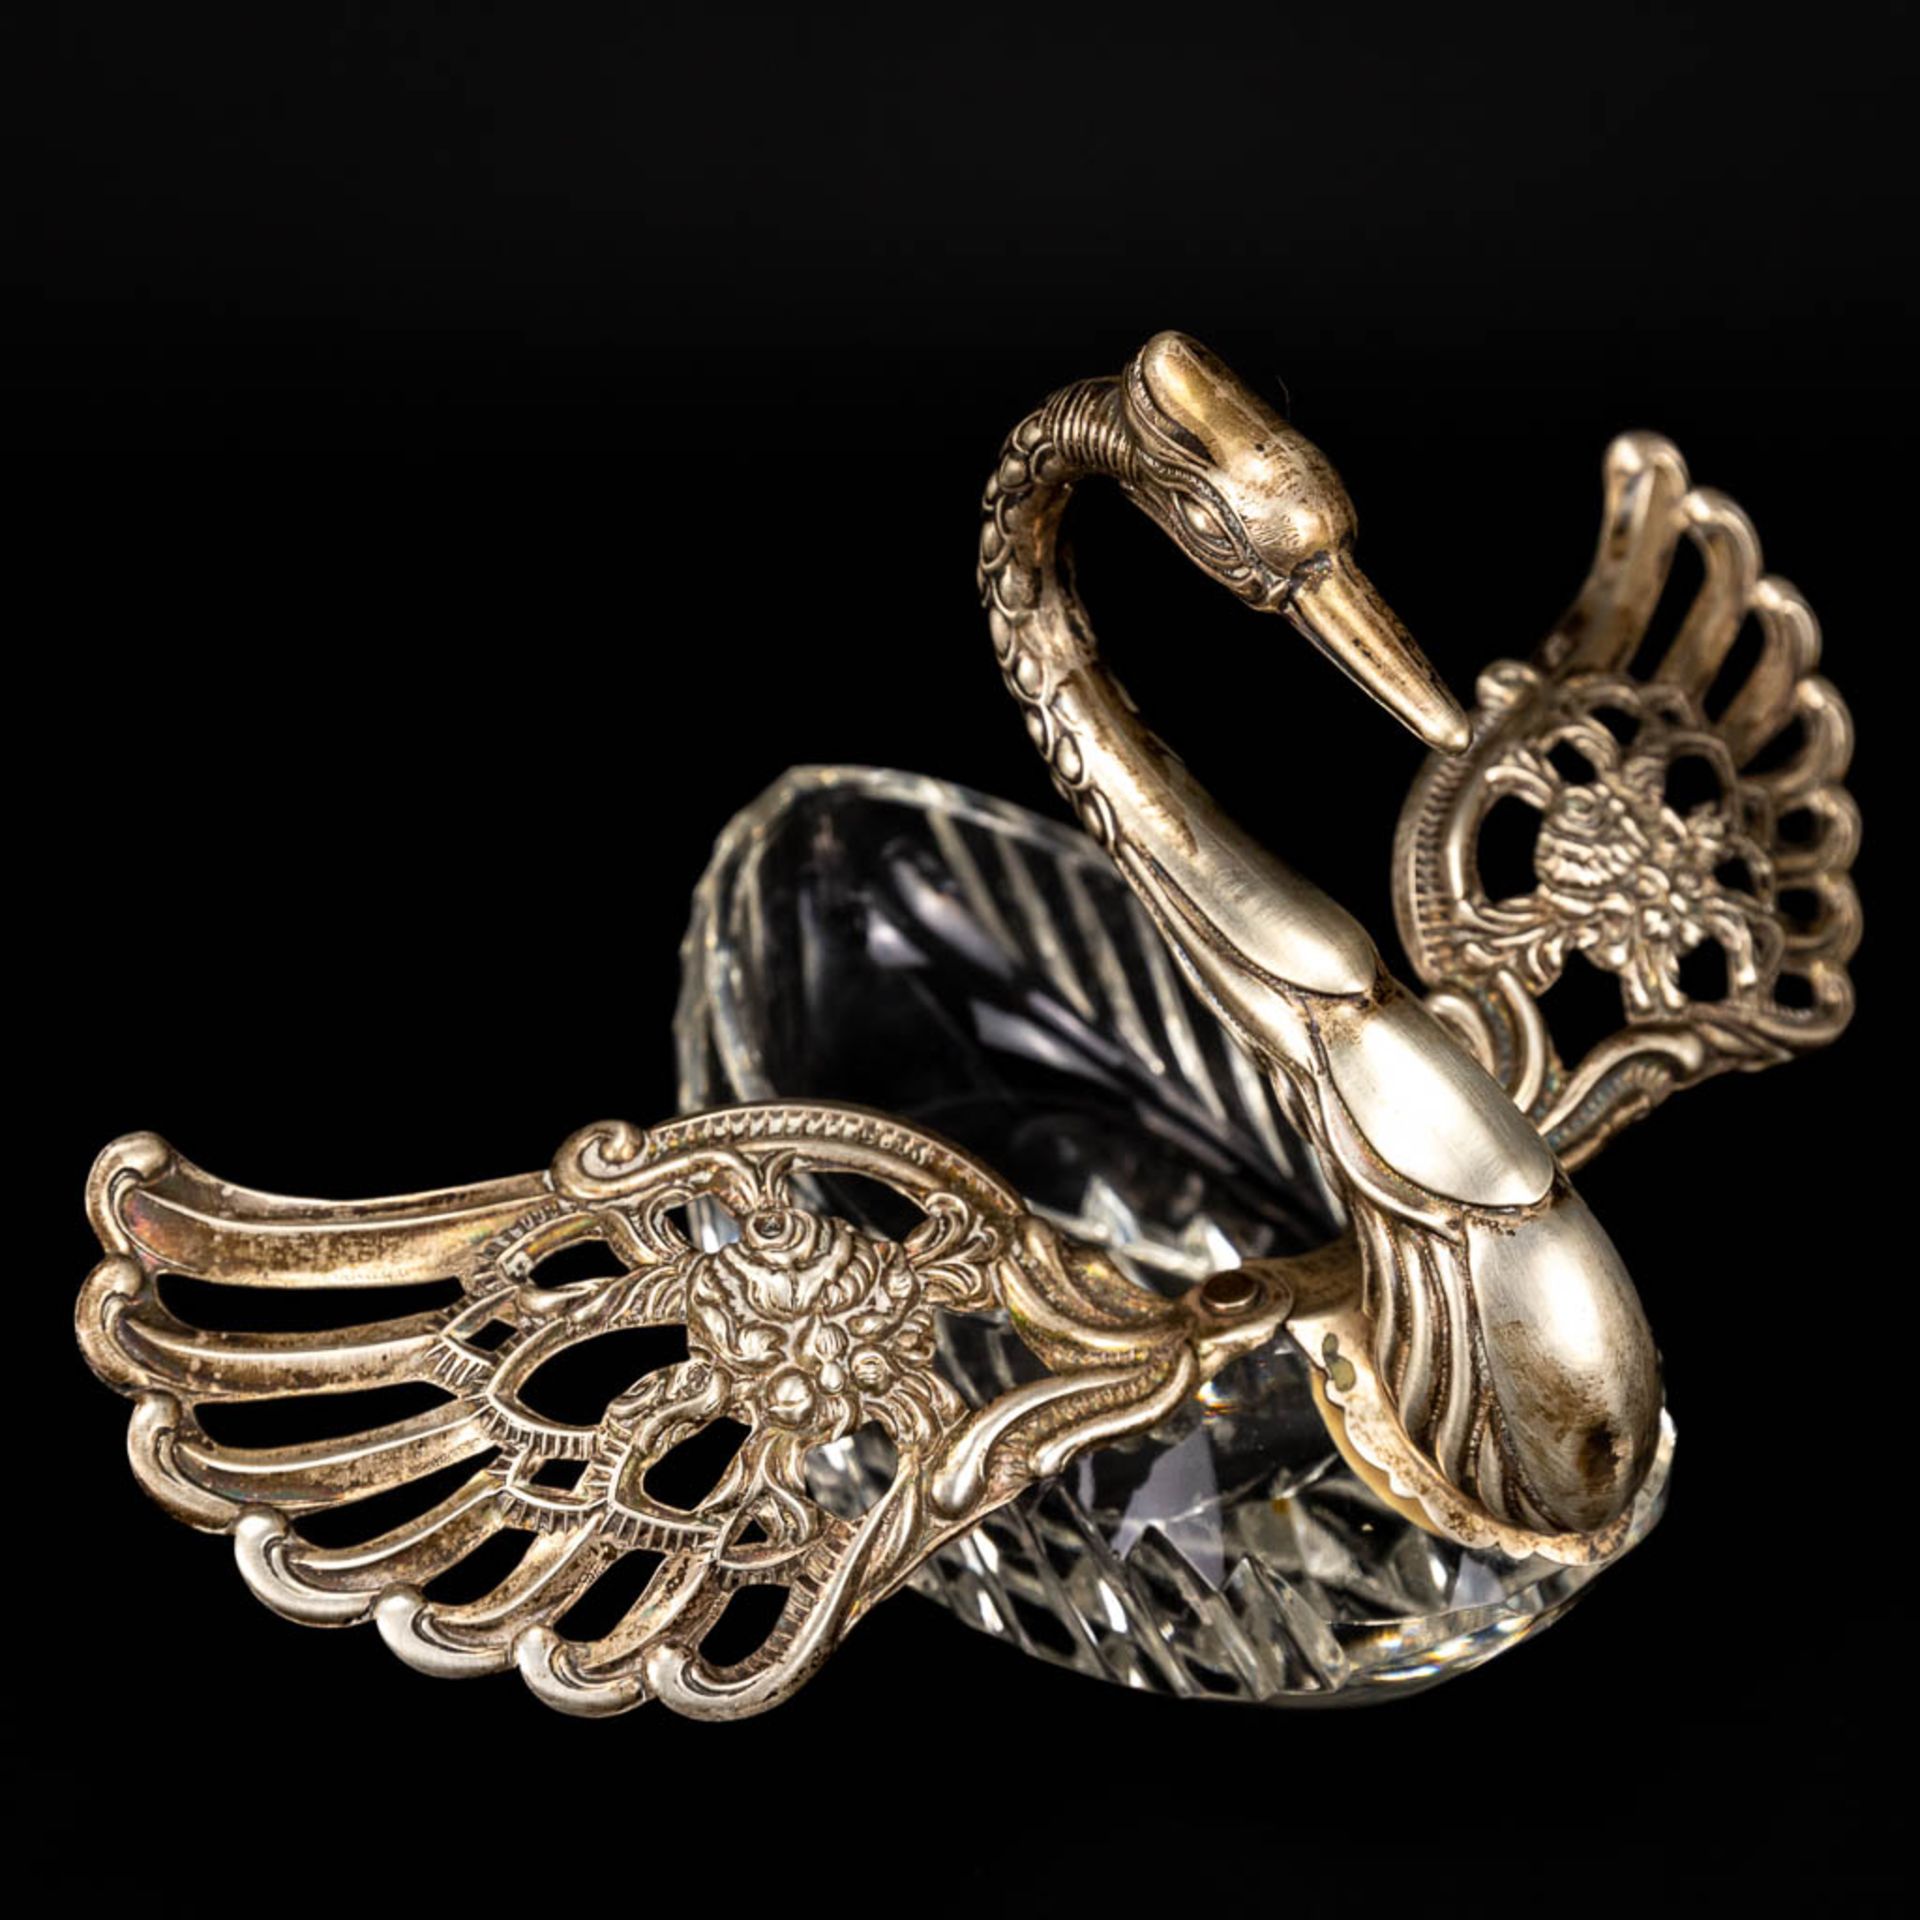 A collection of 3 sugar pots in the shape of a swan, made of crystal and solid silver. - Image 5 of 13